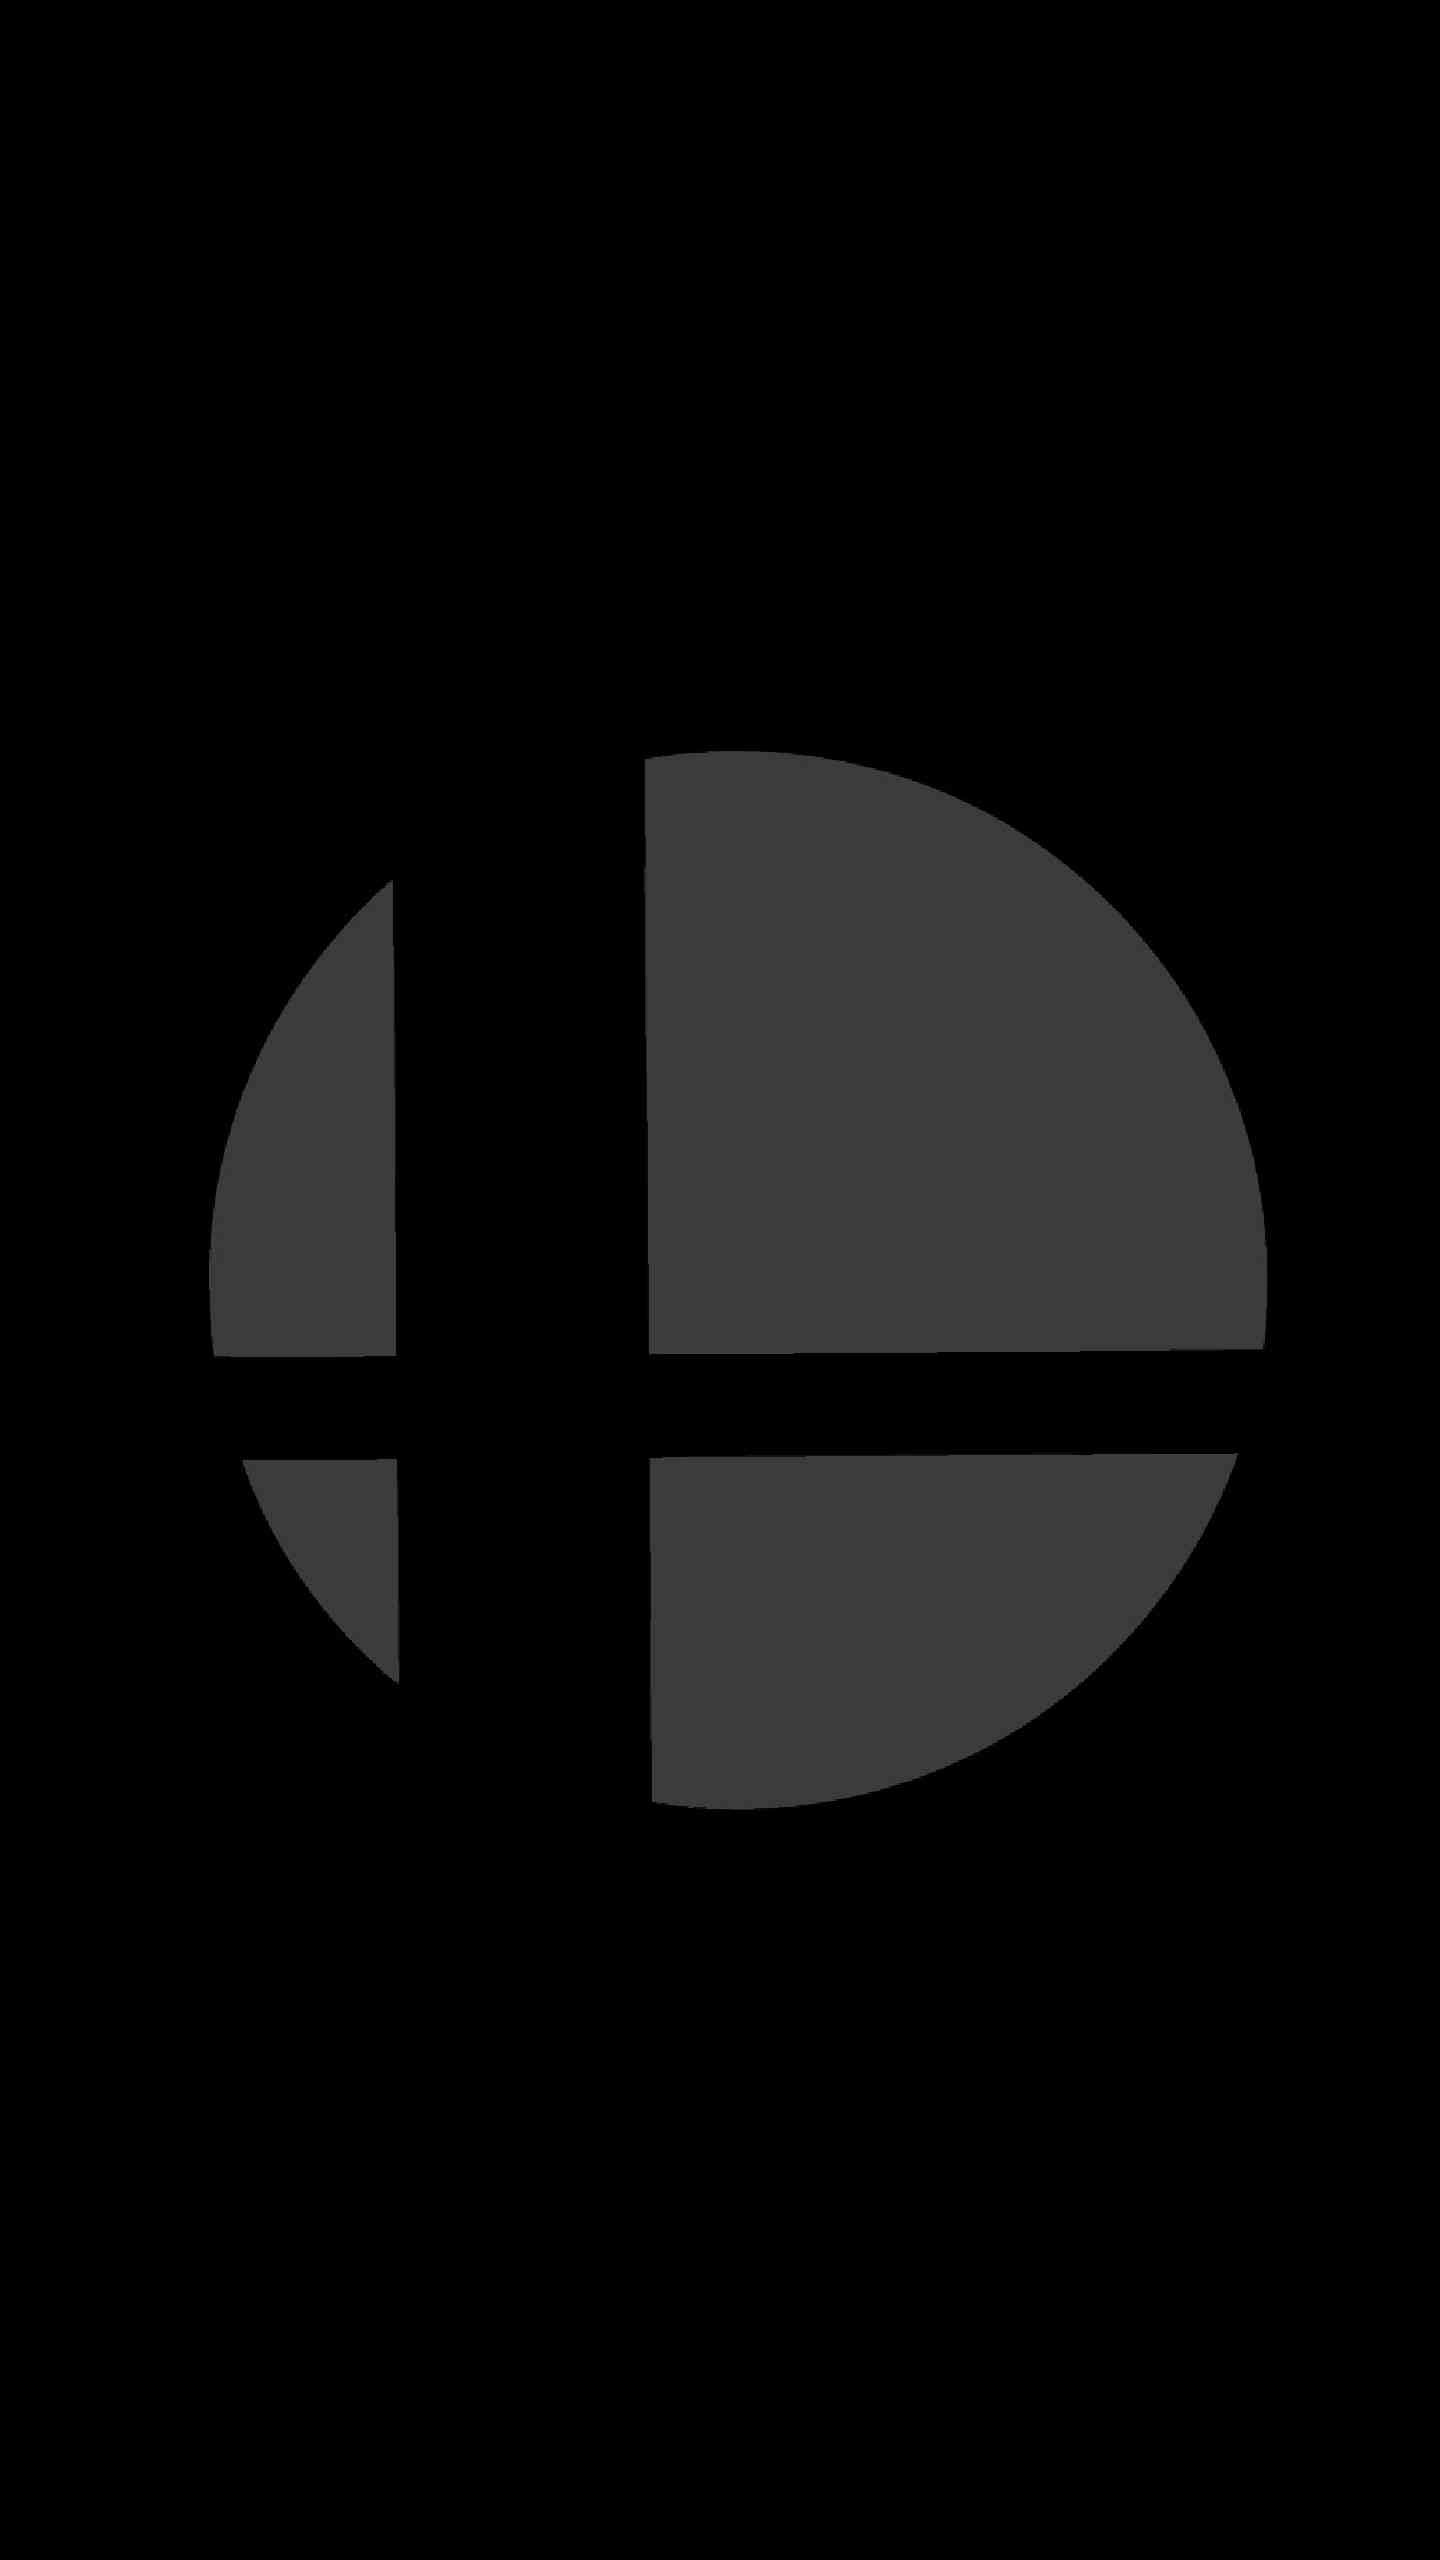 Made a minimalist phone background for smash